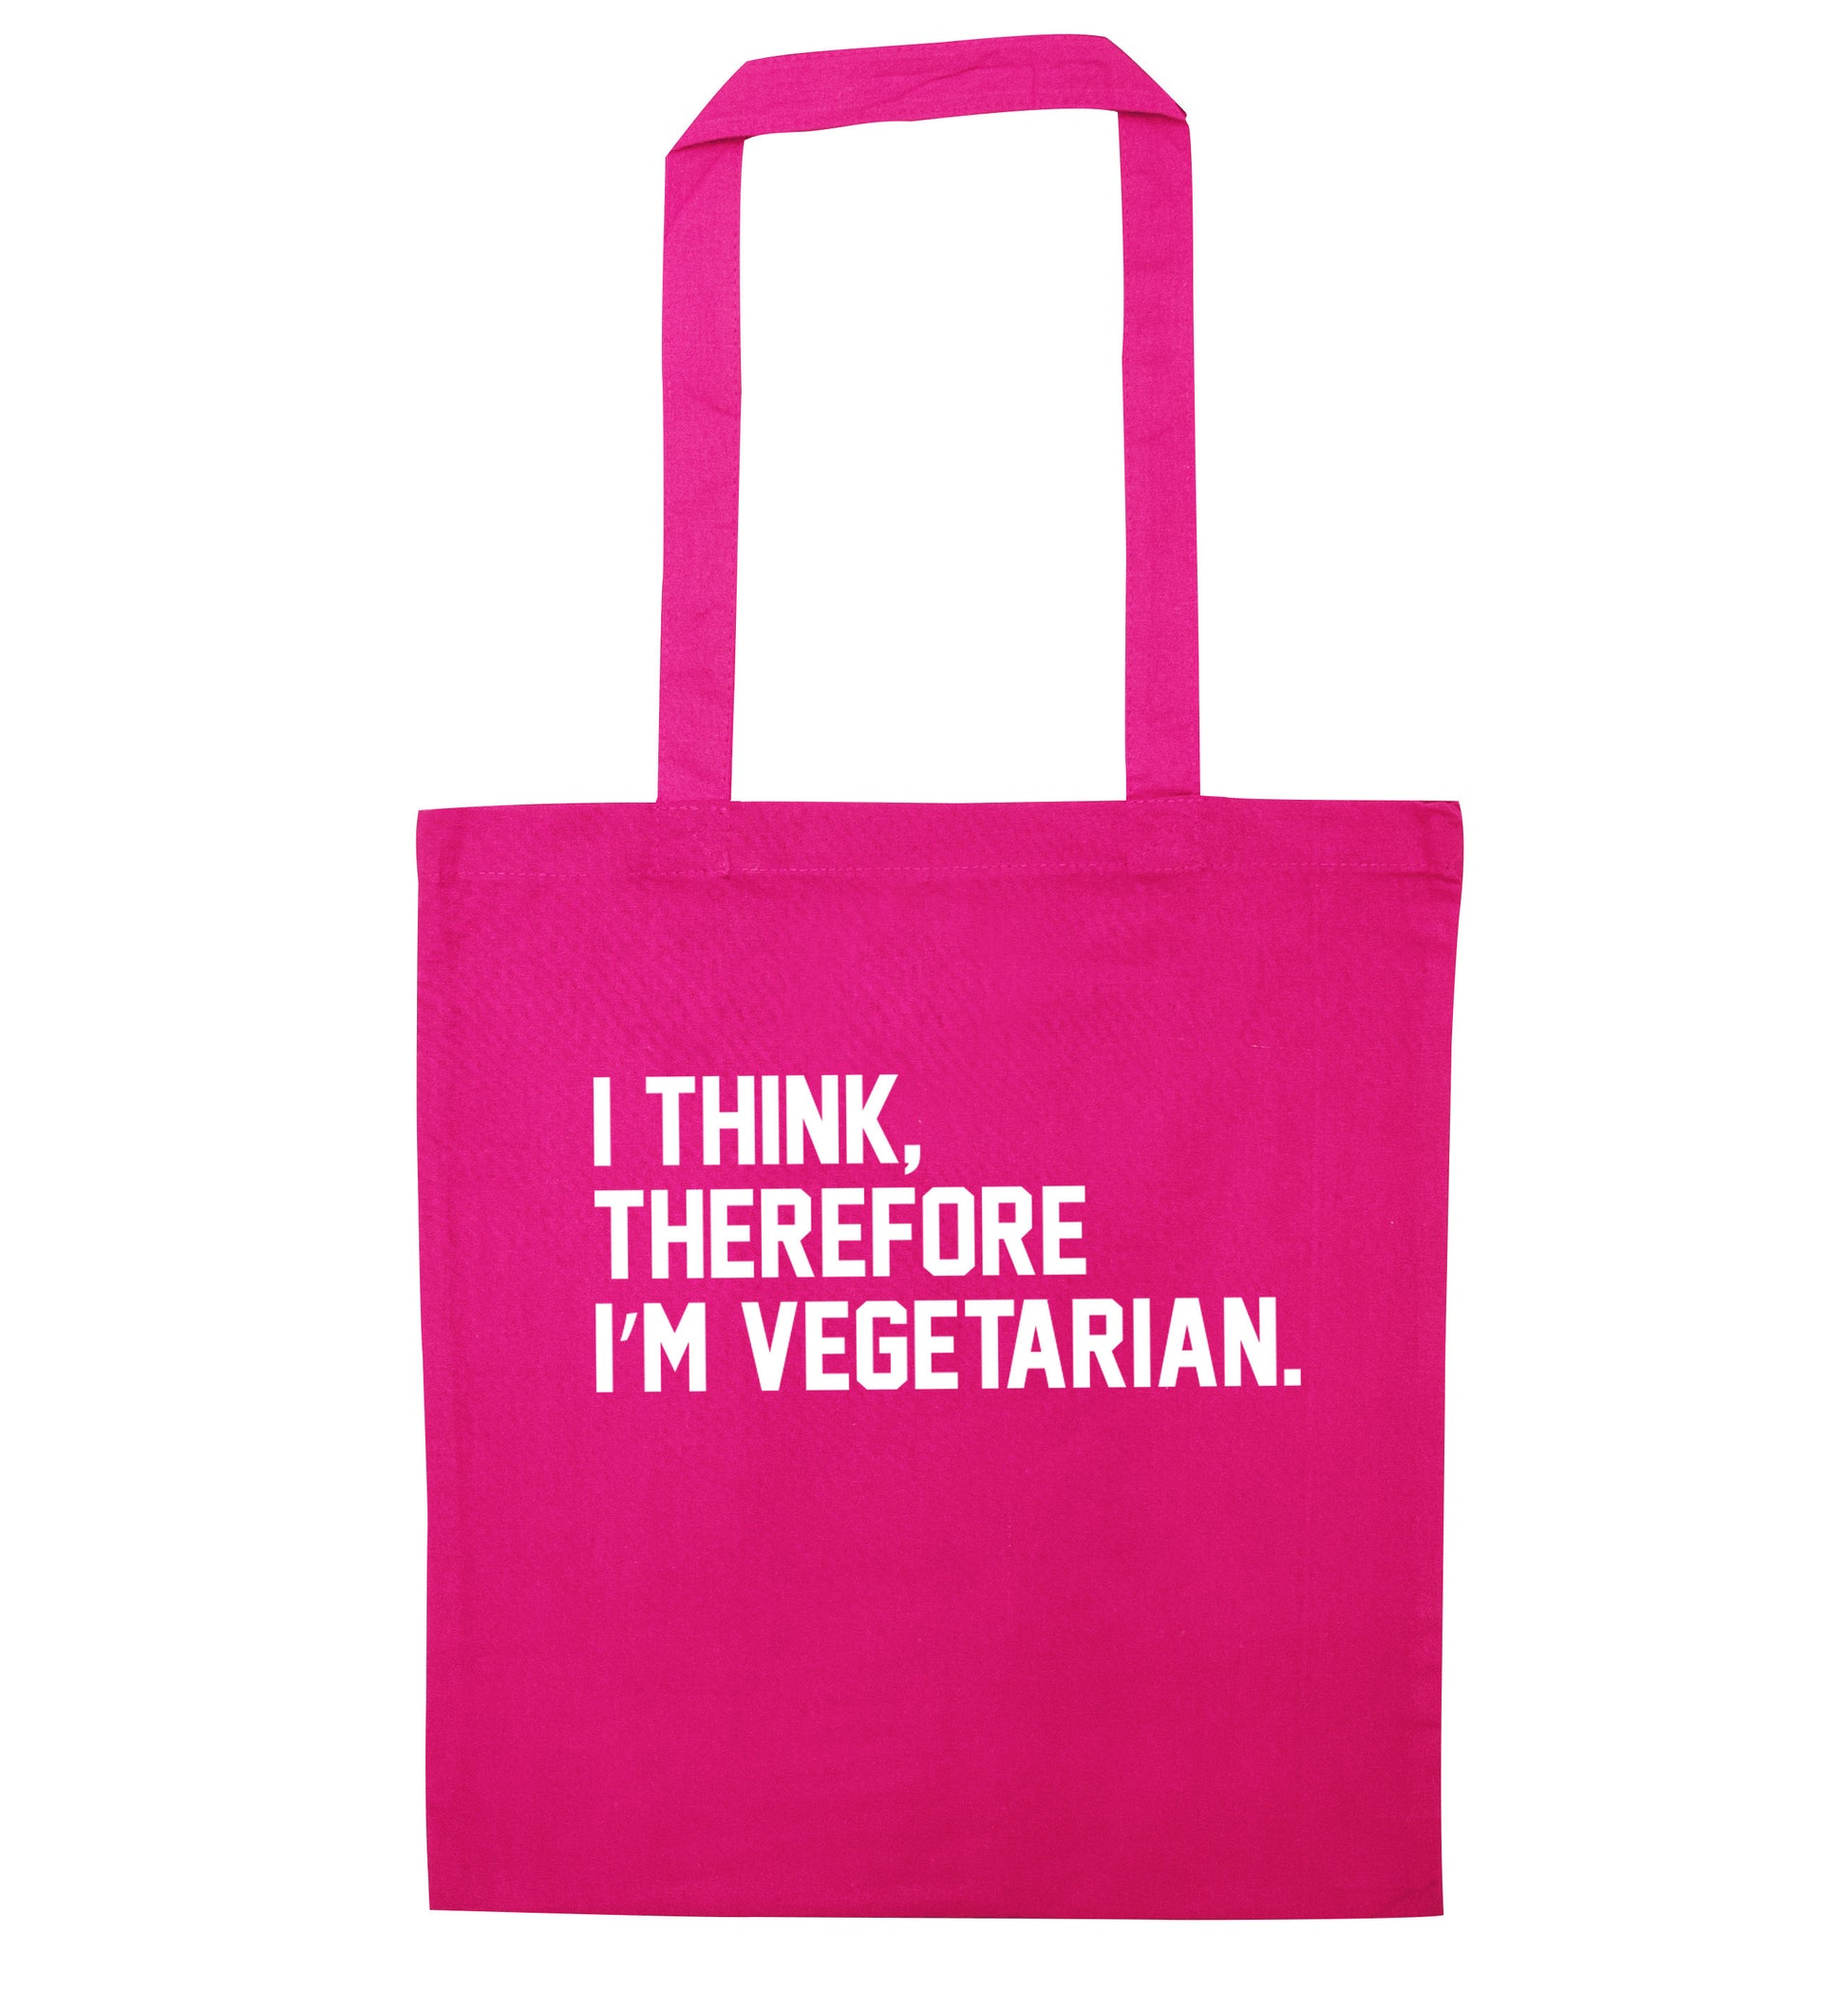 I think therefore I'm vegetarian pink tote bag